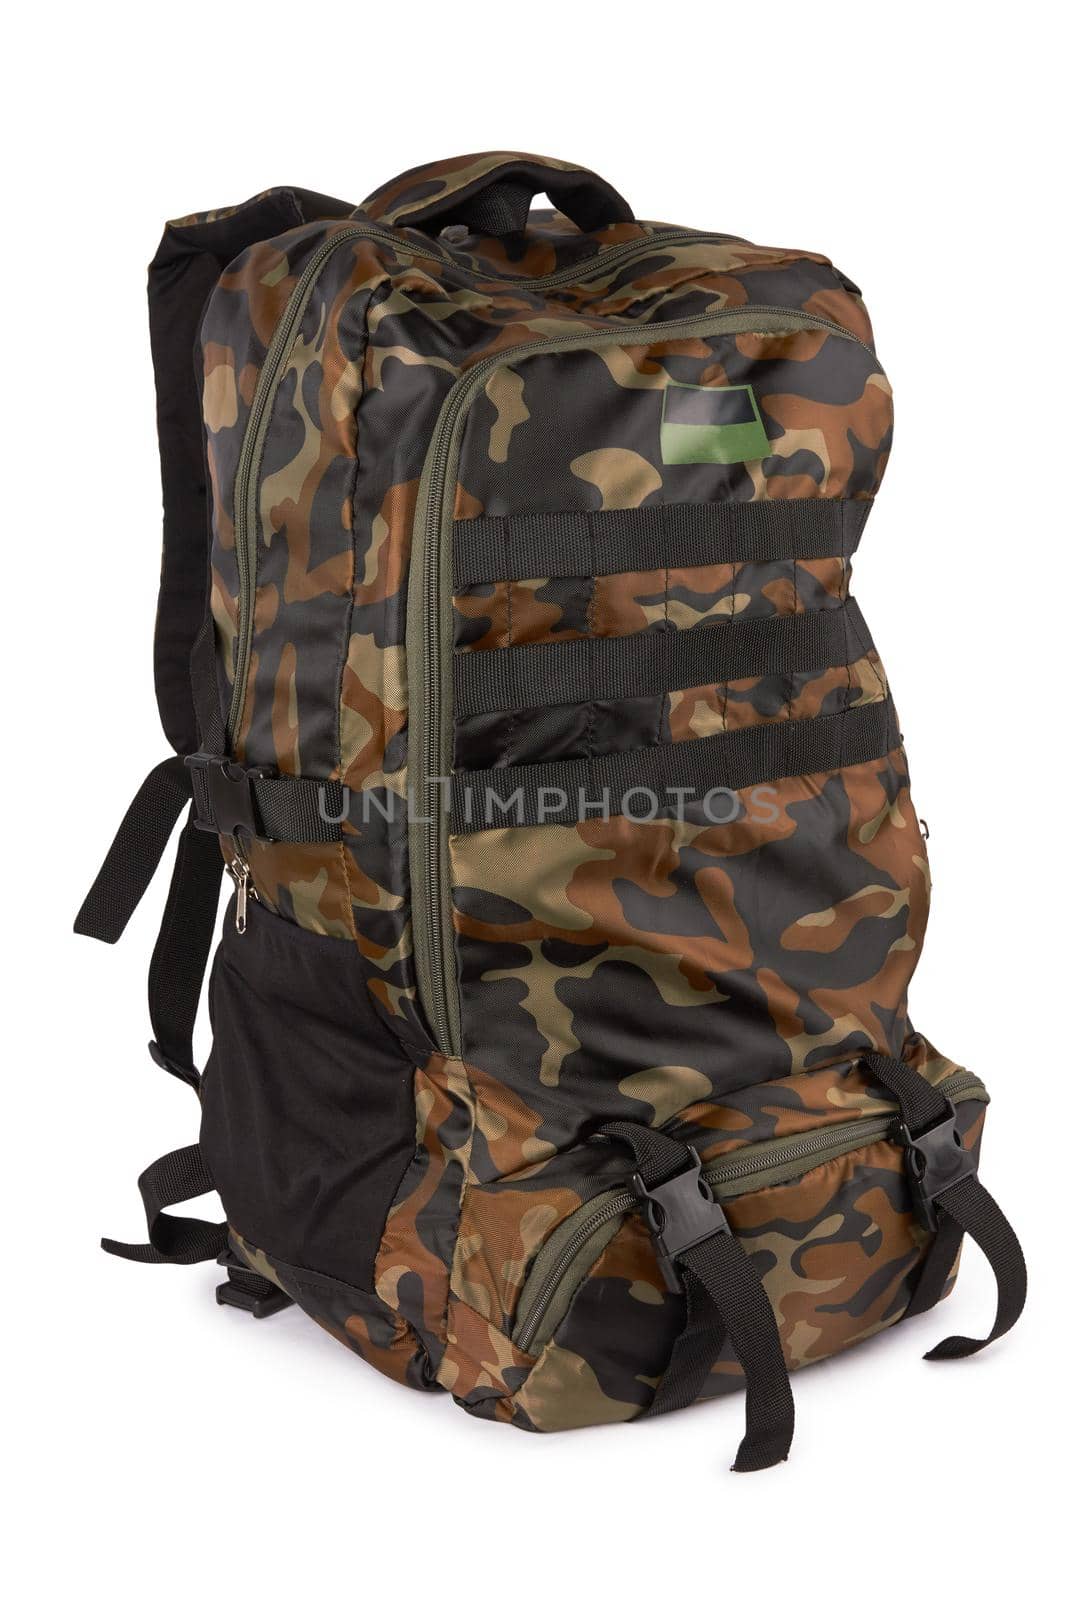 Camouflage backpack on white by pioneer111